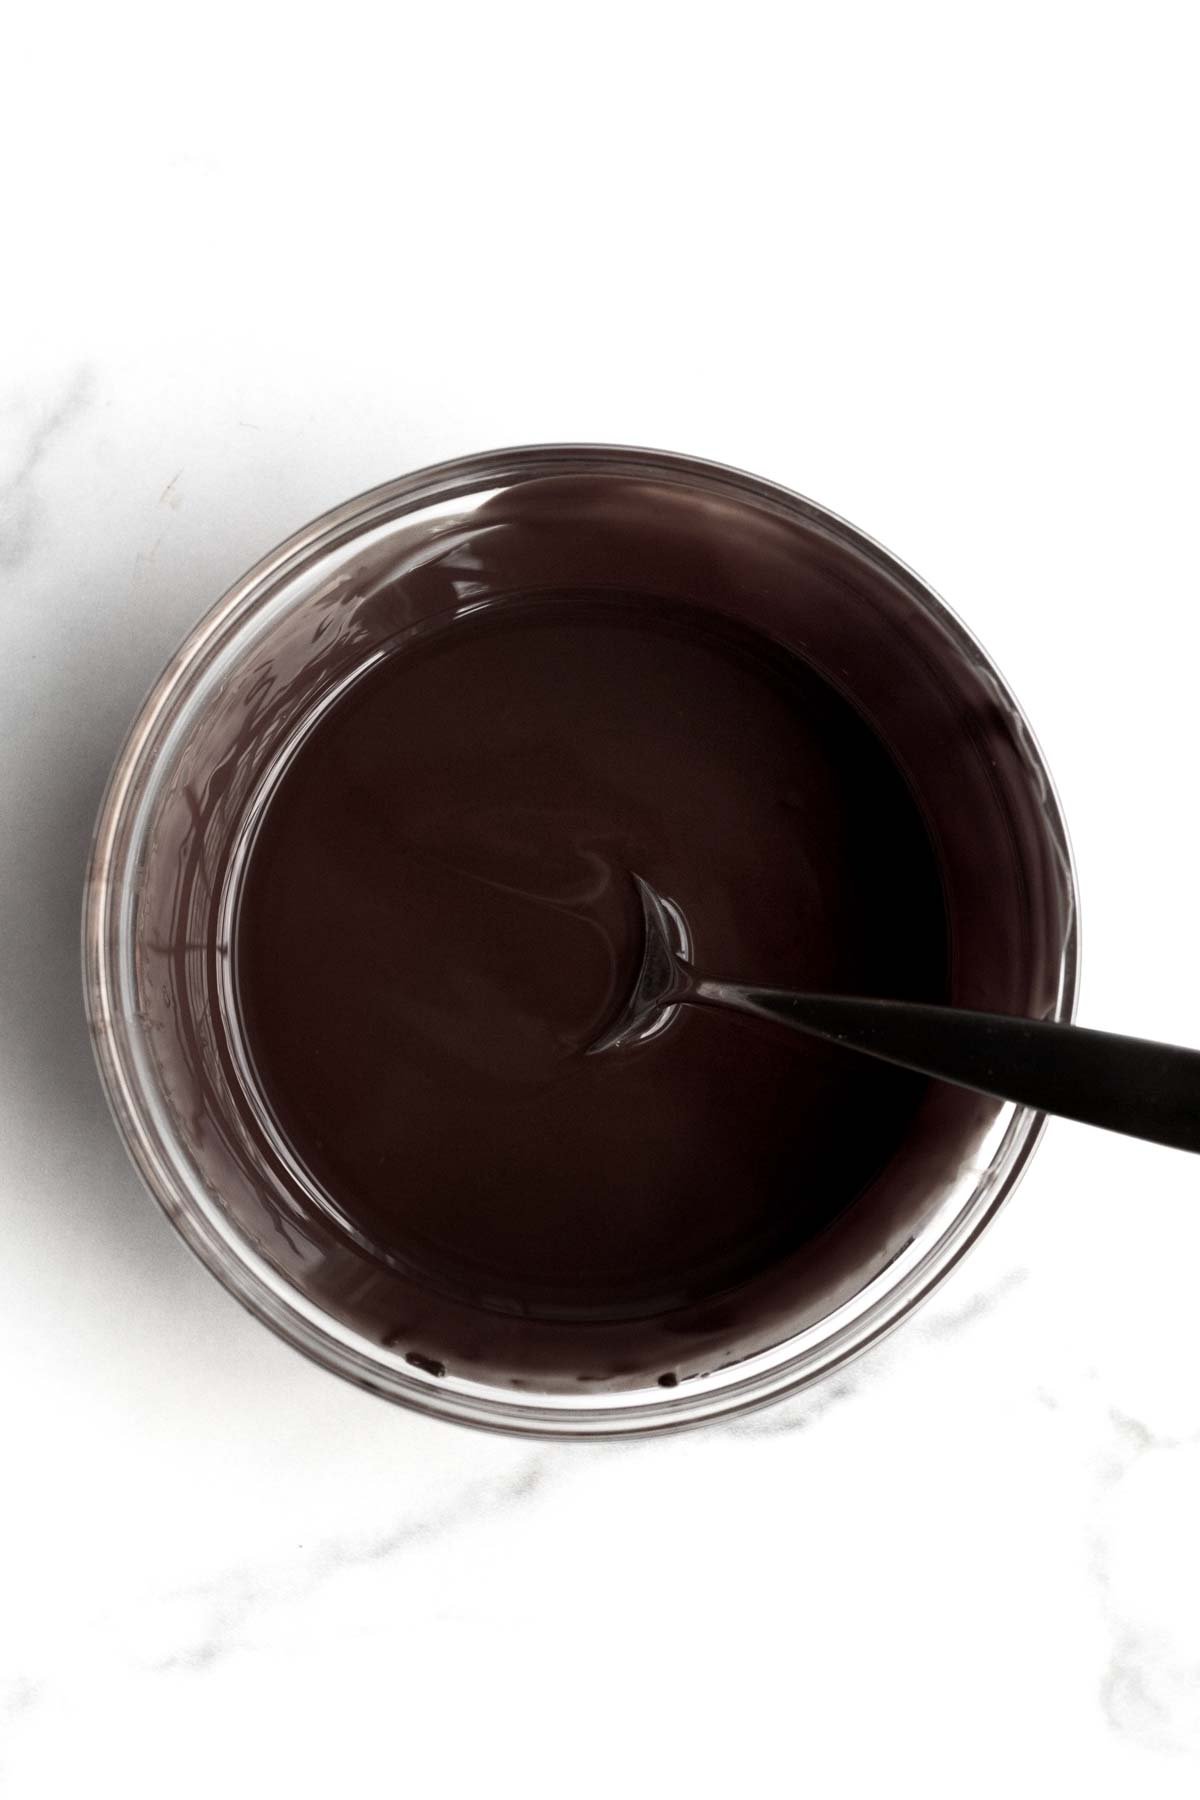 Silky smooth liquid chocolate in a bowl.